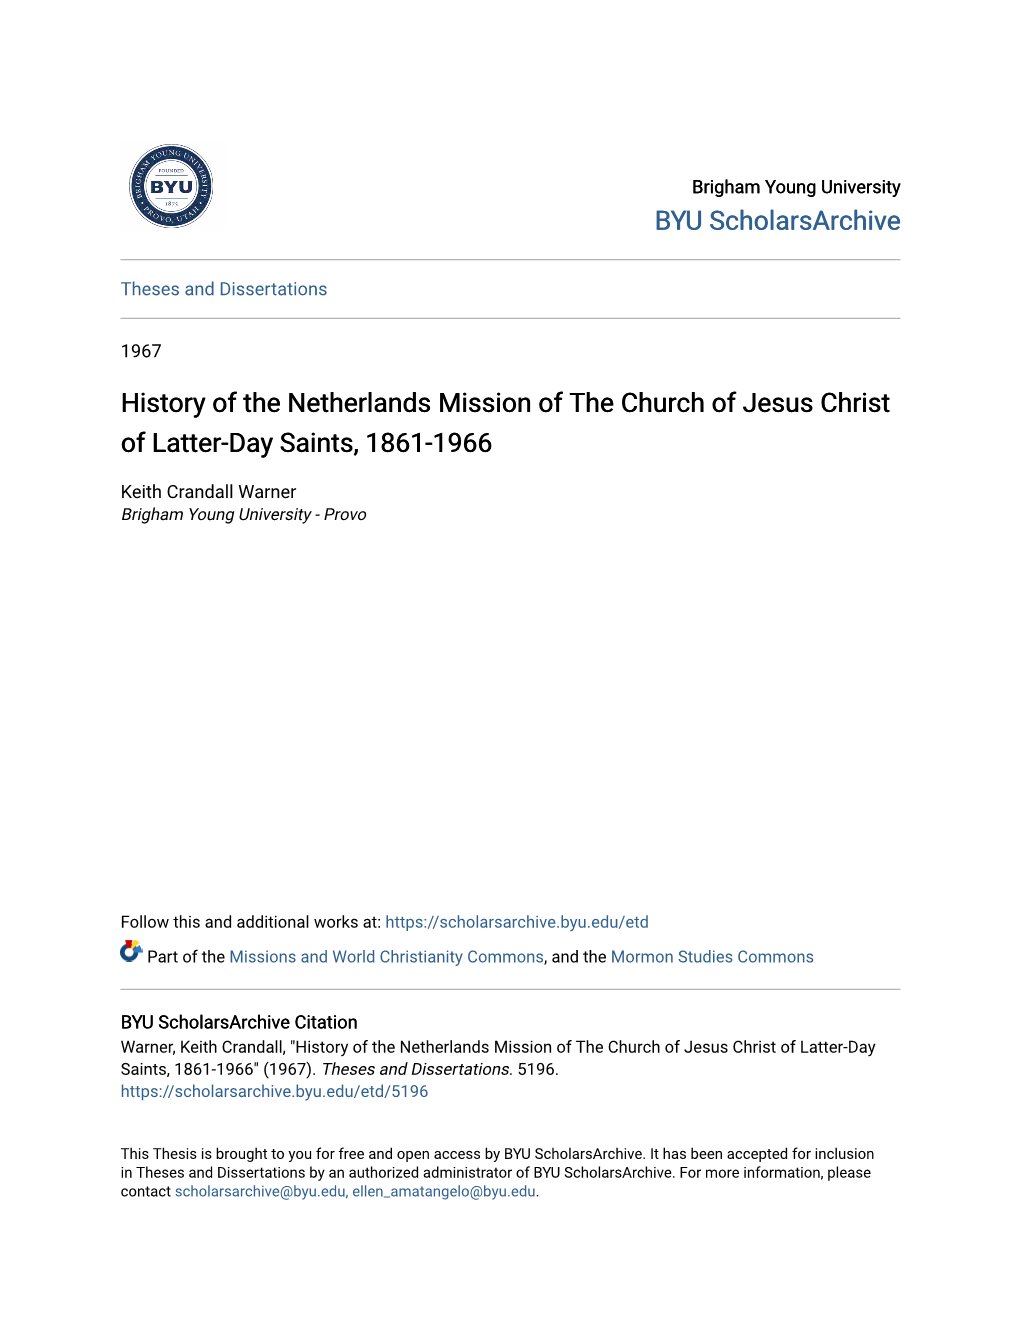 History of the Netherlands Mission of the Church of Jesus Christ of Latter-Day Saints, 1861-1966